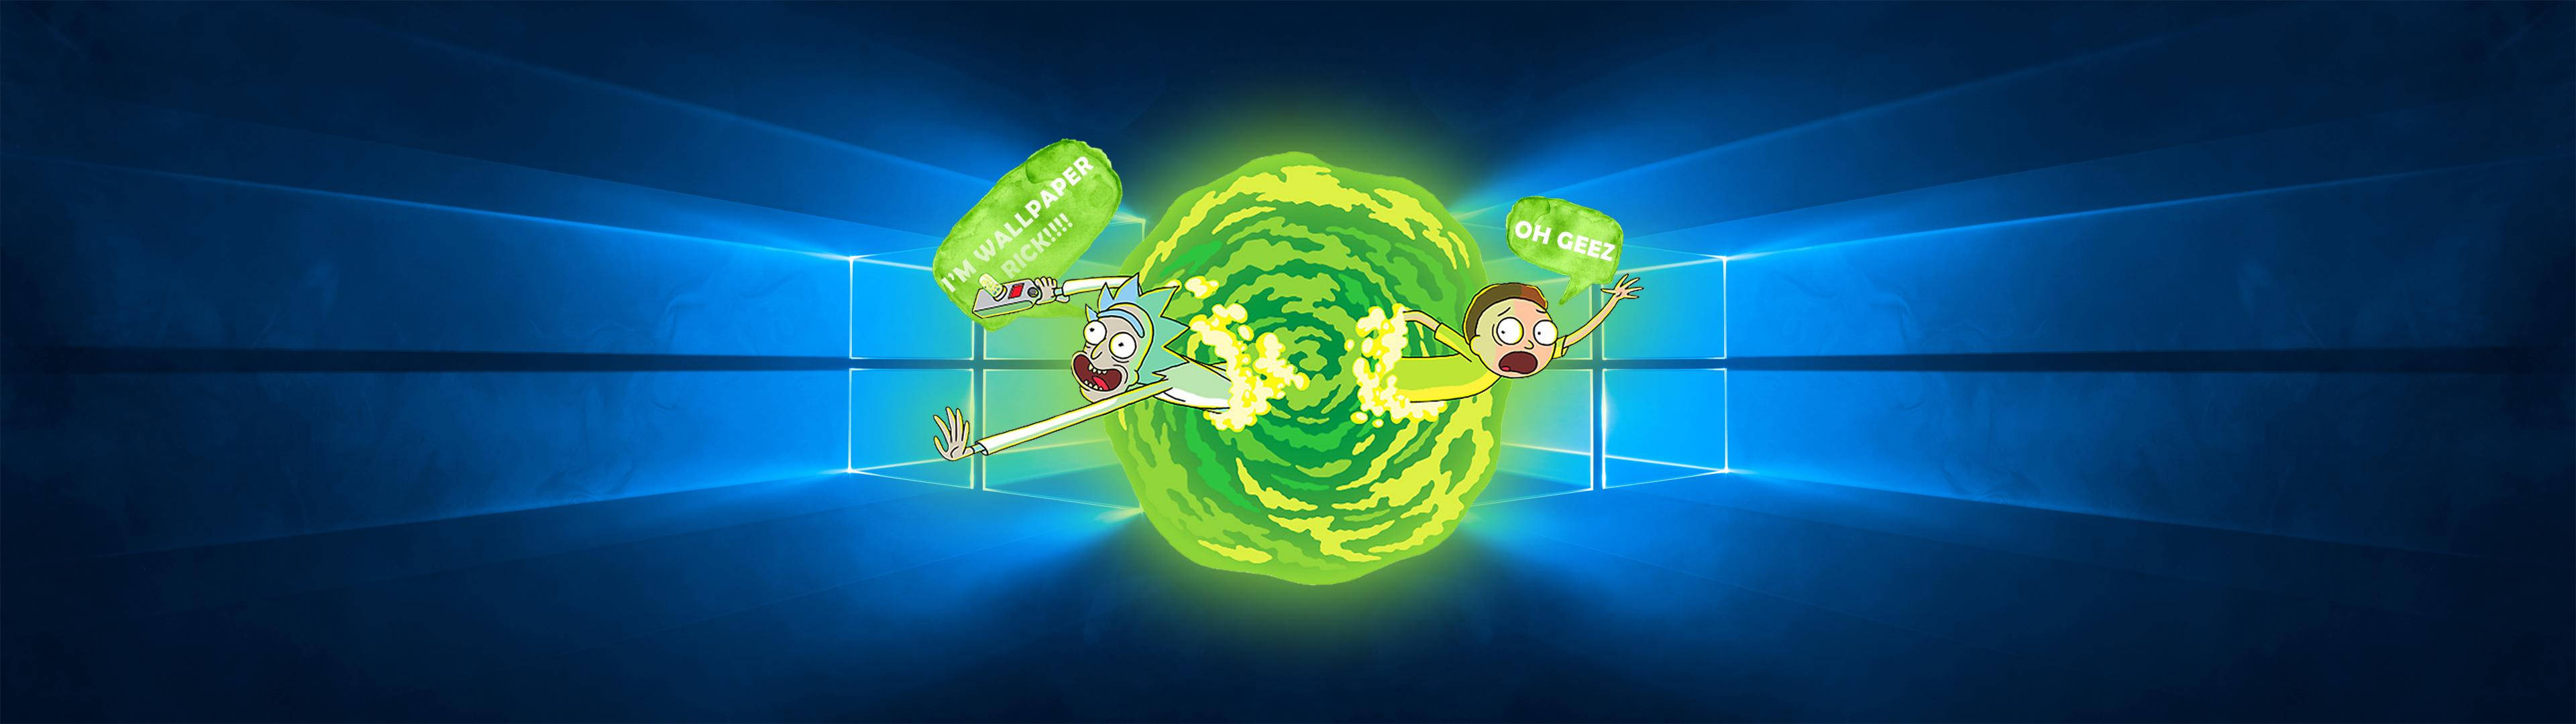 3840X1080 Rick And Morty Wallpaper and Background